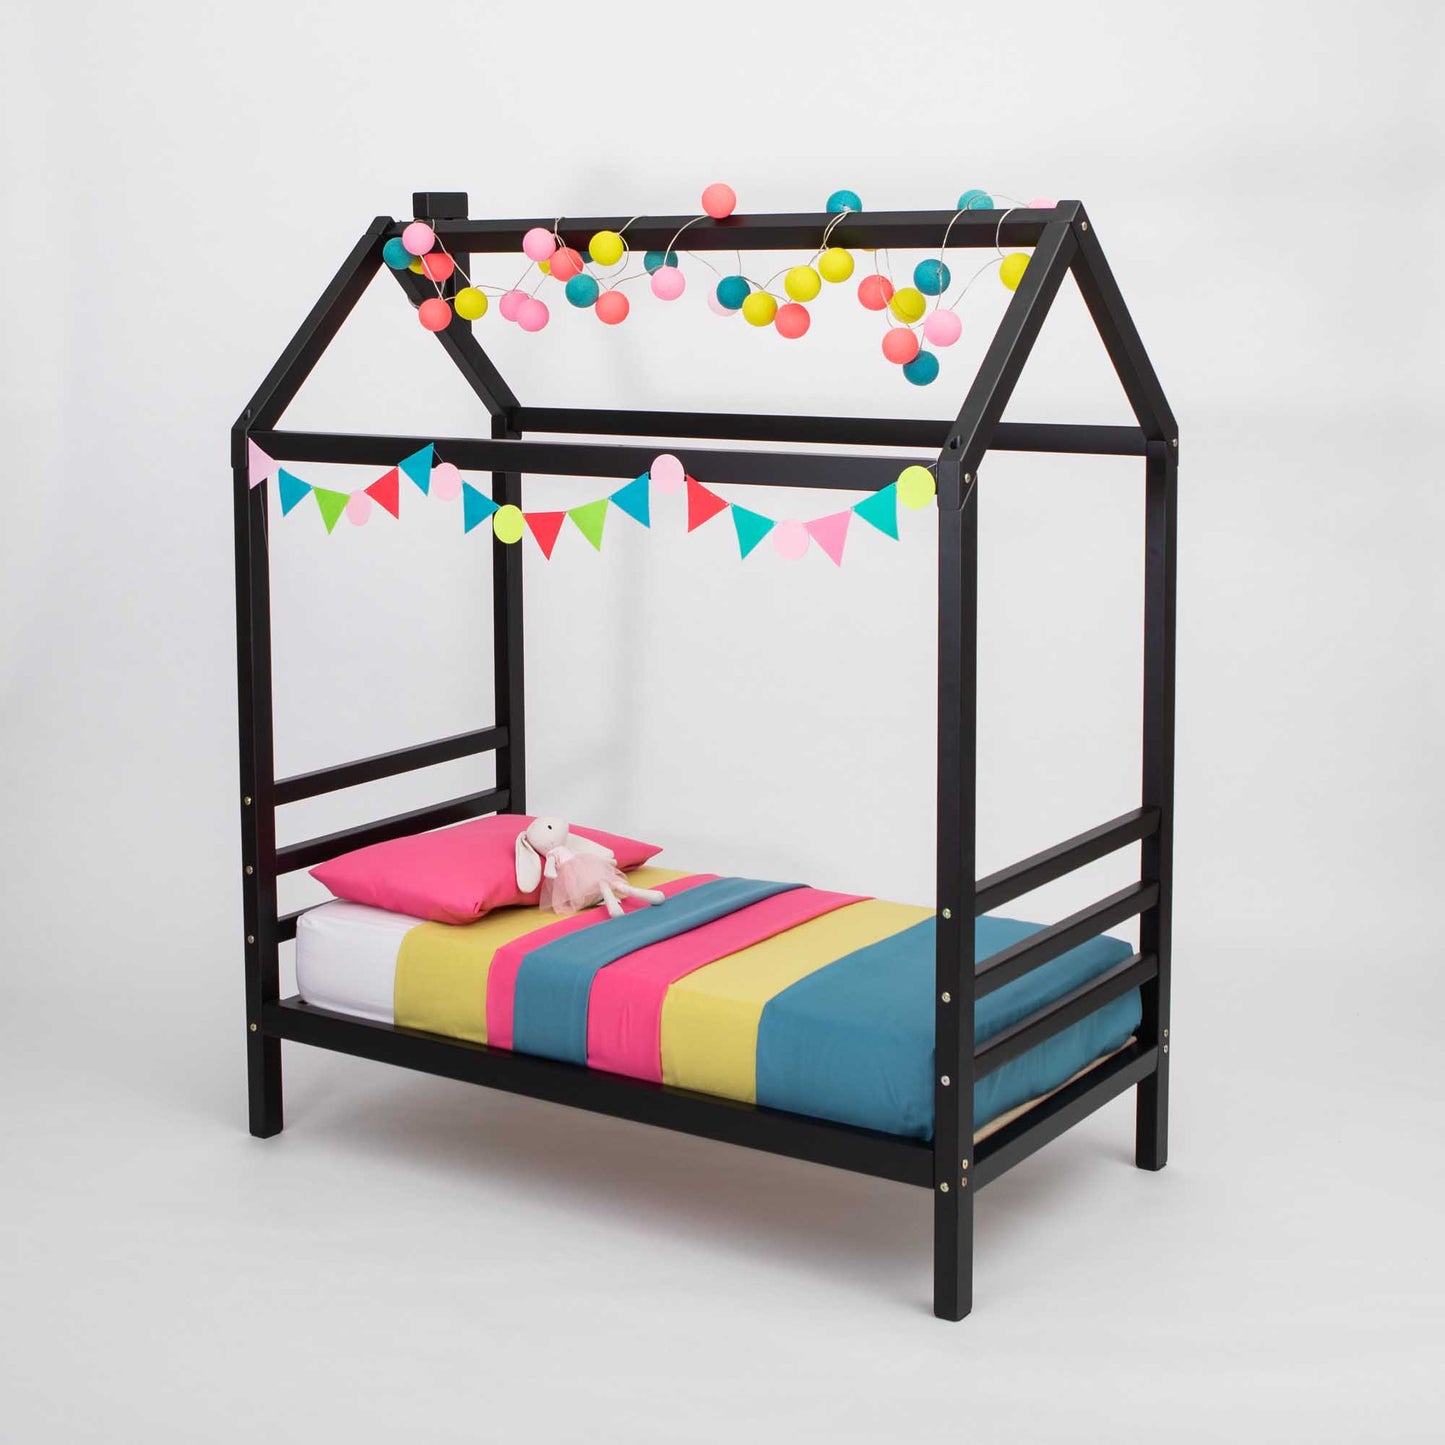 A Kids' house bed on legs with a headboard and footboard with a colorful canopy and bunting.